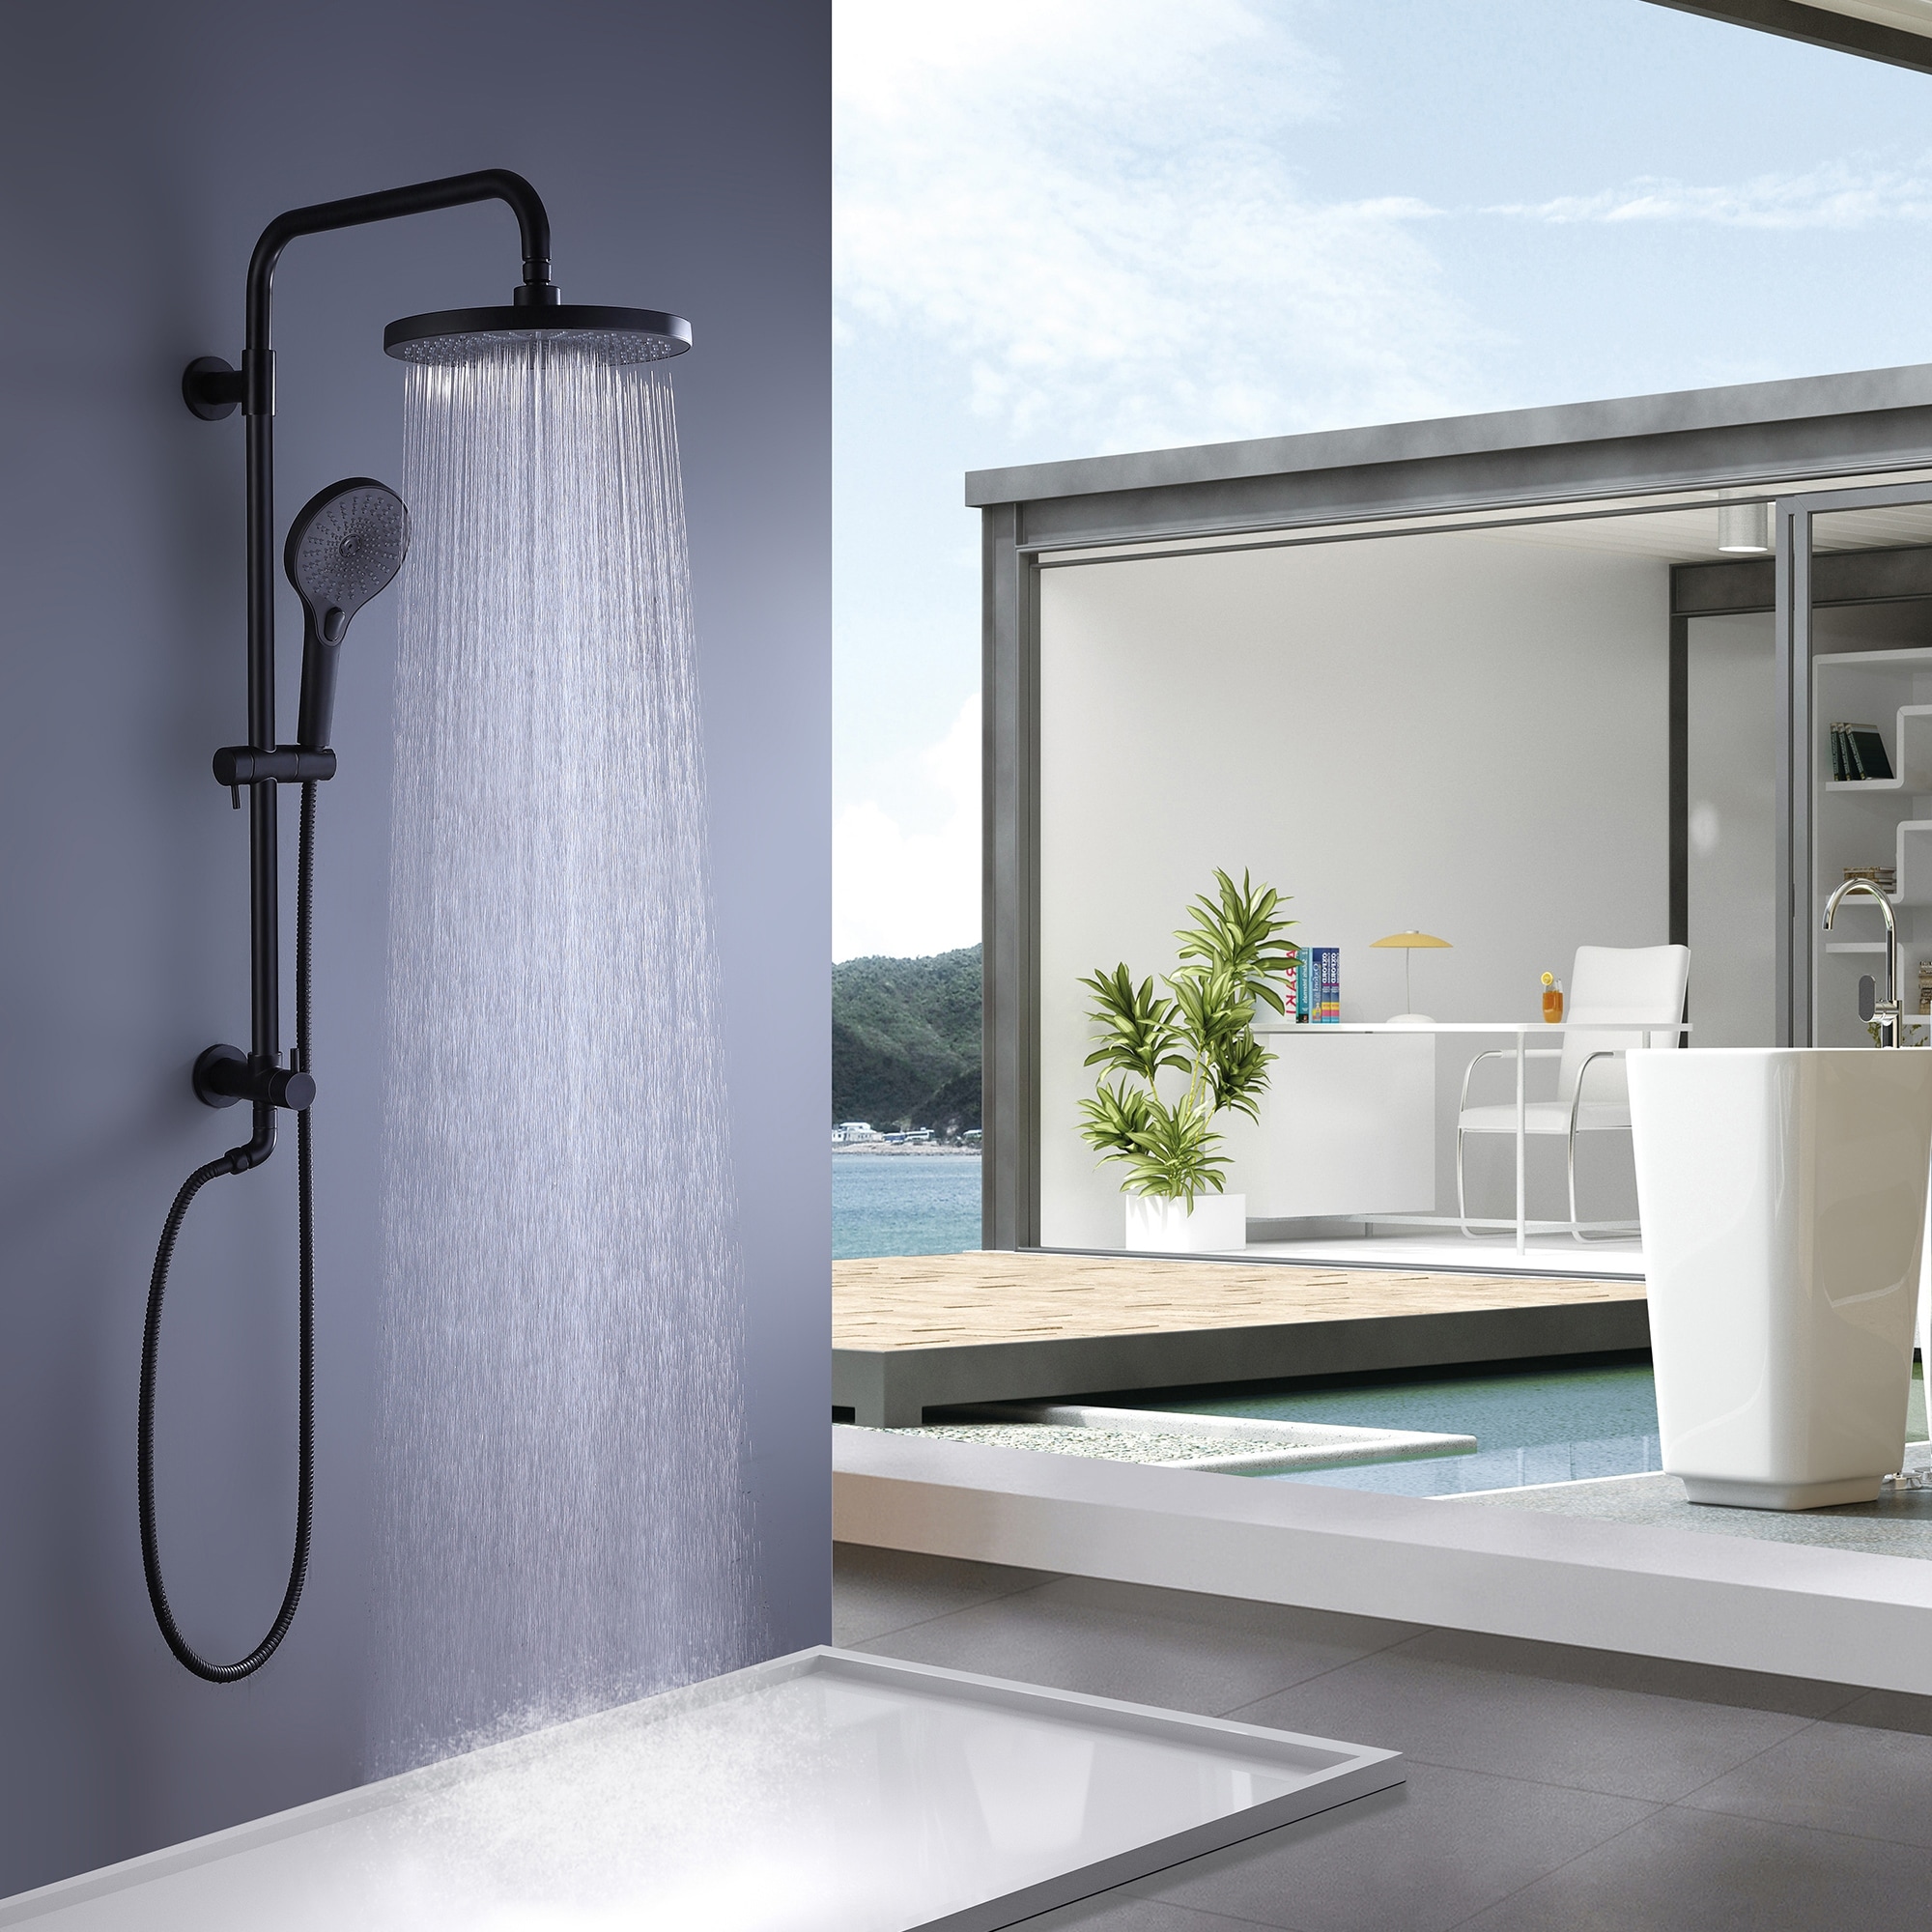 https://ak1.ostkcdn.com/images/products/is/images/direct/feb501f504c36b6da029c183448ba44fd02f057b/4-Way-Matte-Black-Round-Rain-Shower-Shower-System-With-Handheld.jpg